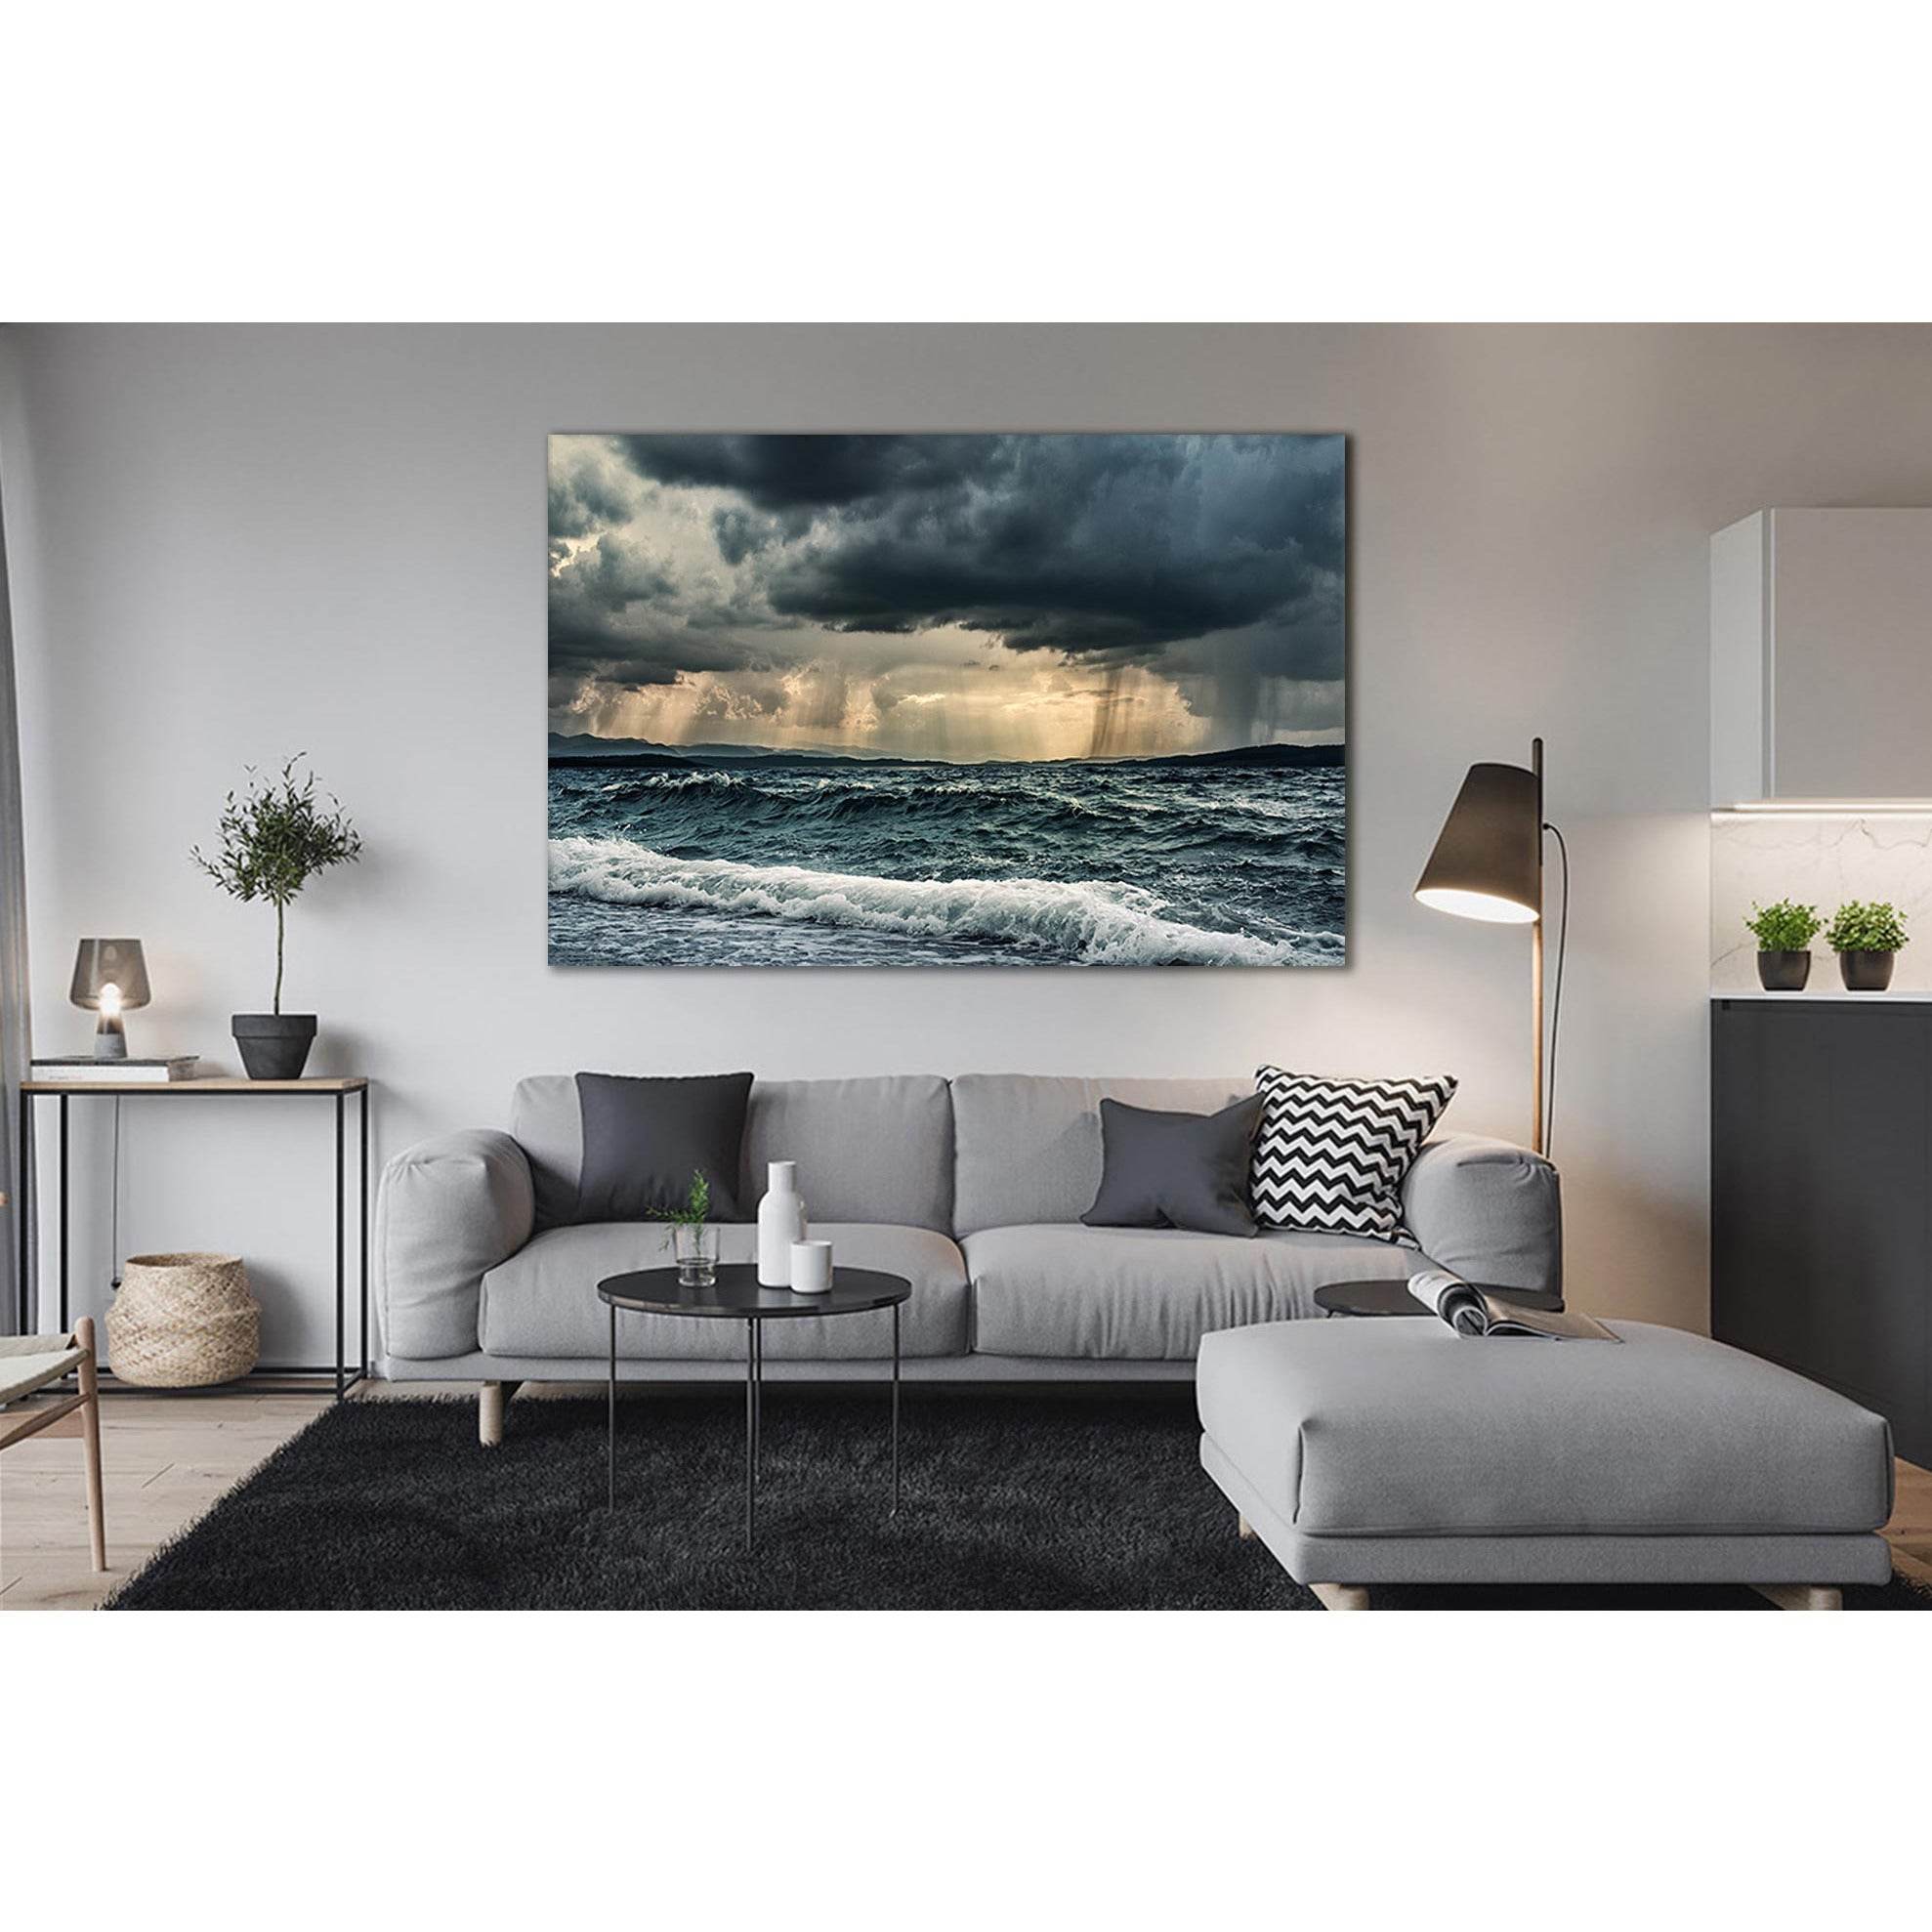 Rain Over Stormy Ocean №SL54 Ready to Hang Canvas Print